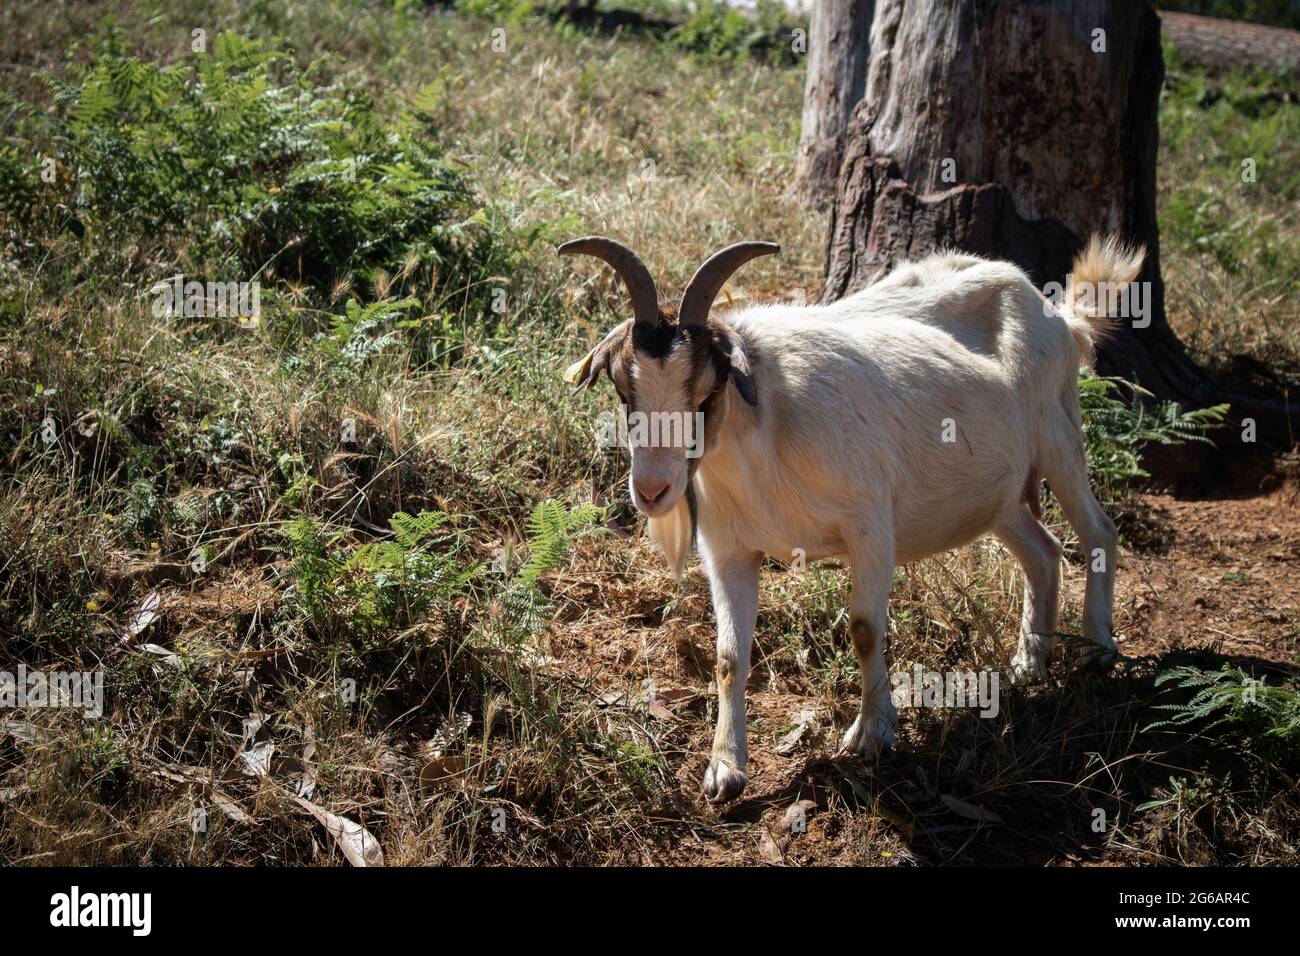 One white and brown capra aegagrus hircus or domestic goat standing in a rural field Stock Photo